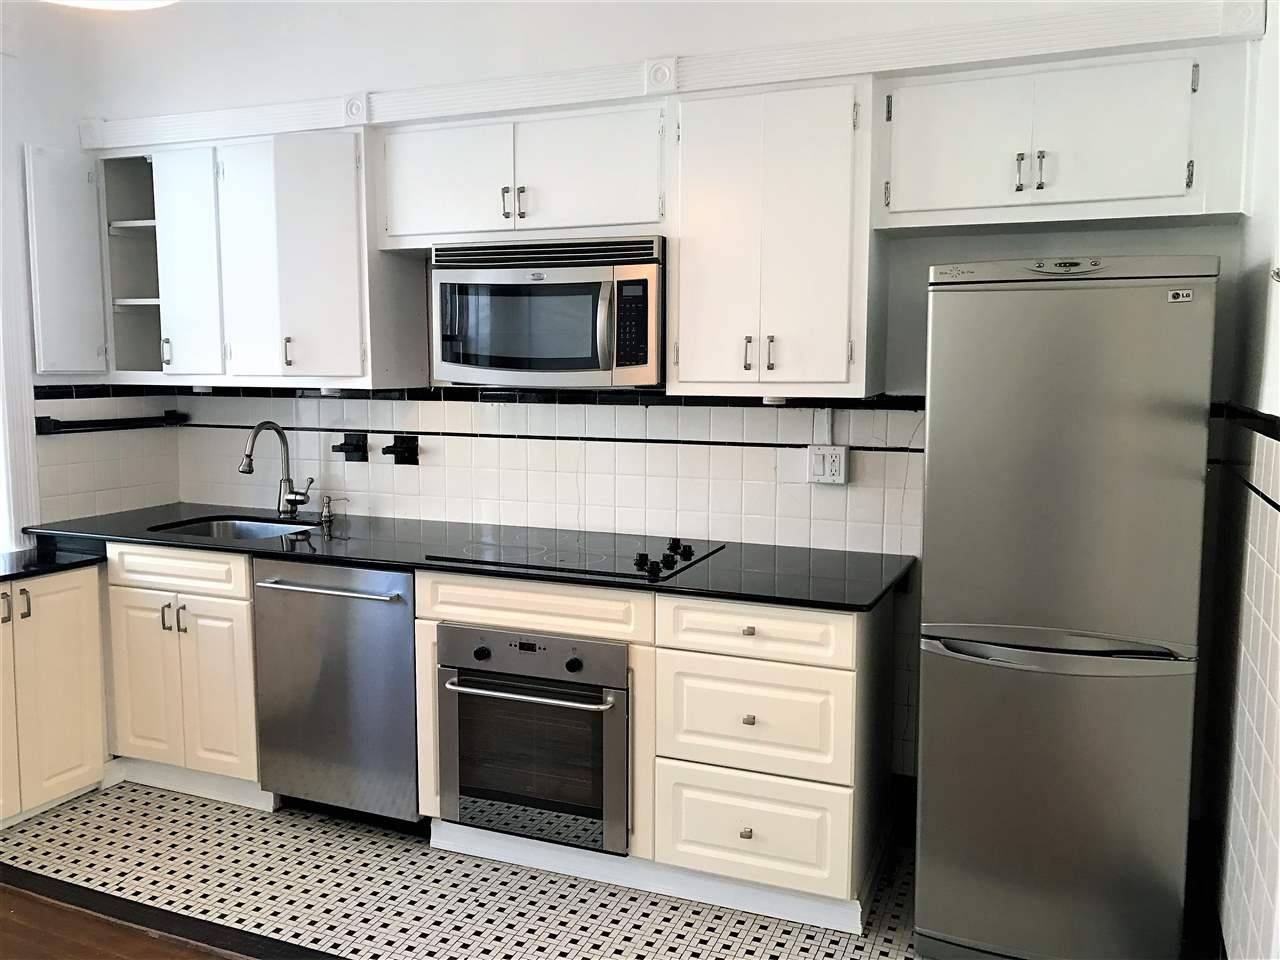 Enjoy city living at a spectacular price point - 1 BR Historic Downtown New Jersey